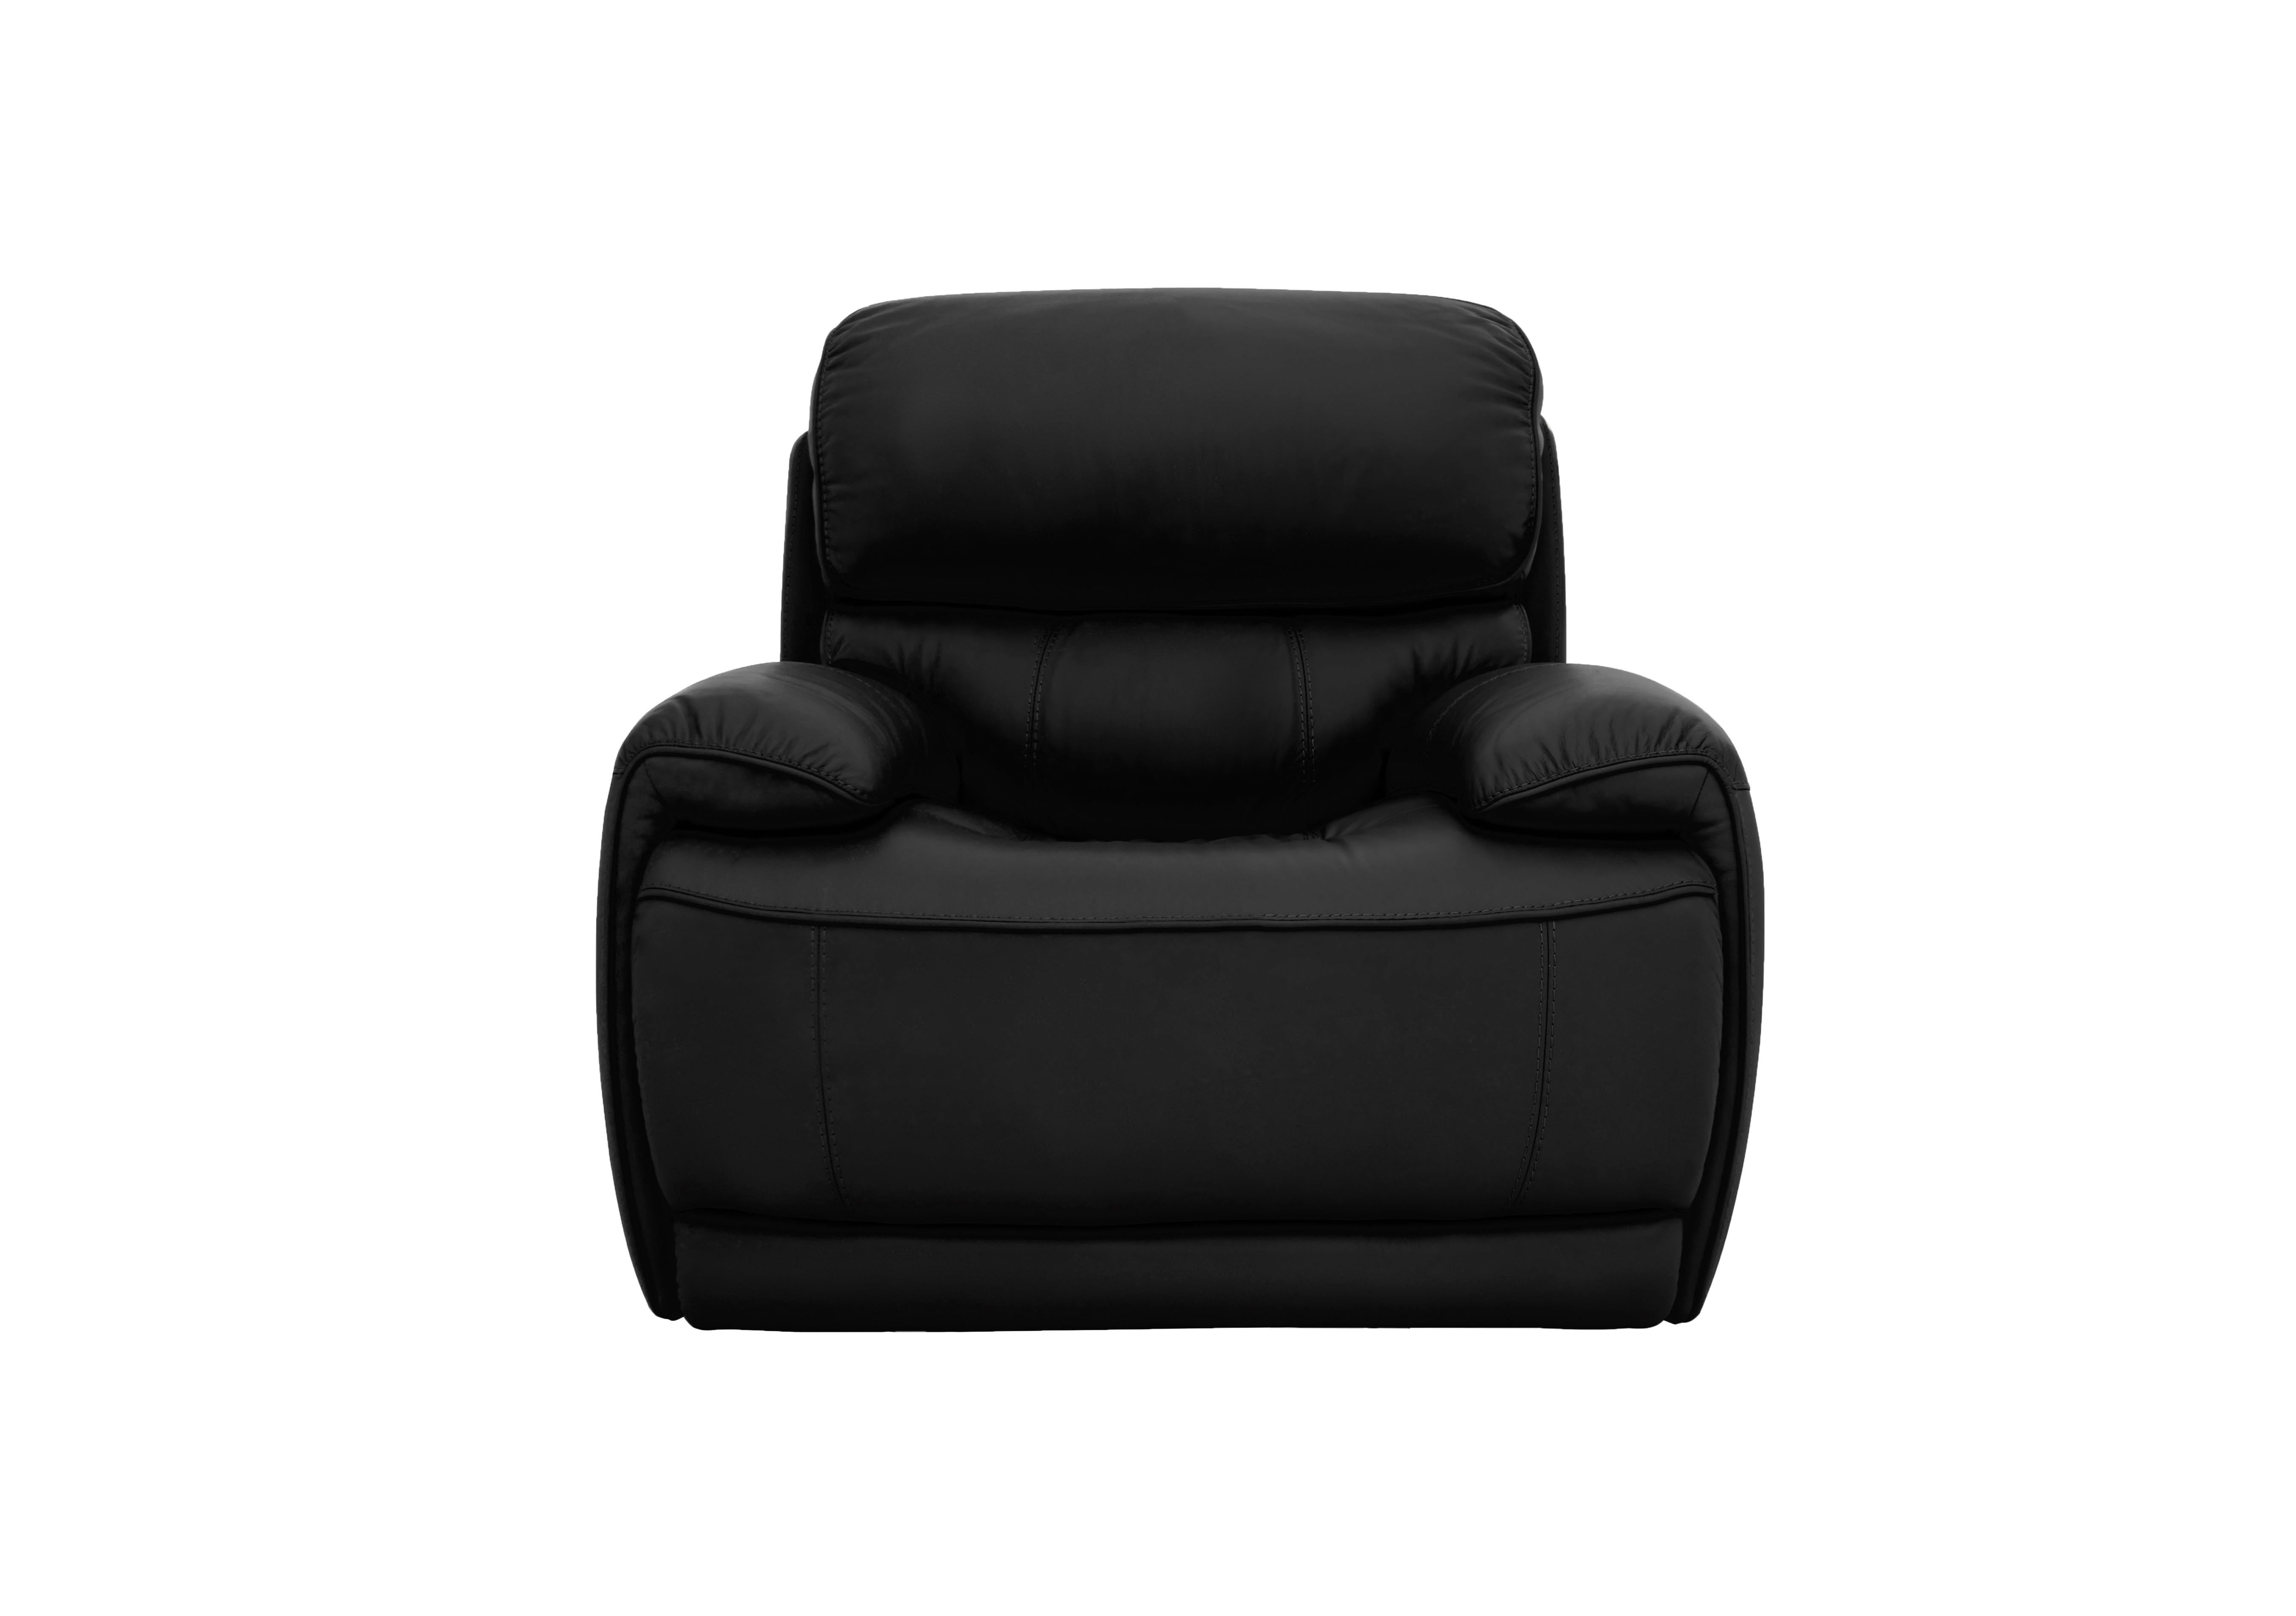 Rocco Leather Power Rocker Armchair with Power Headrests in Bv-3500 Classic Black on Furniture Village